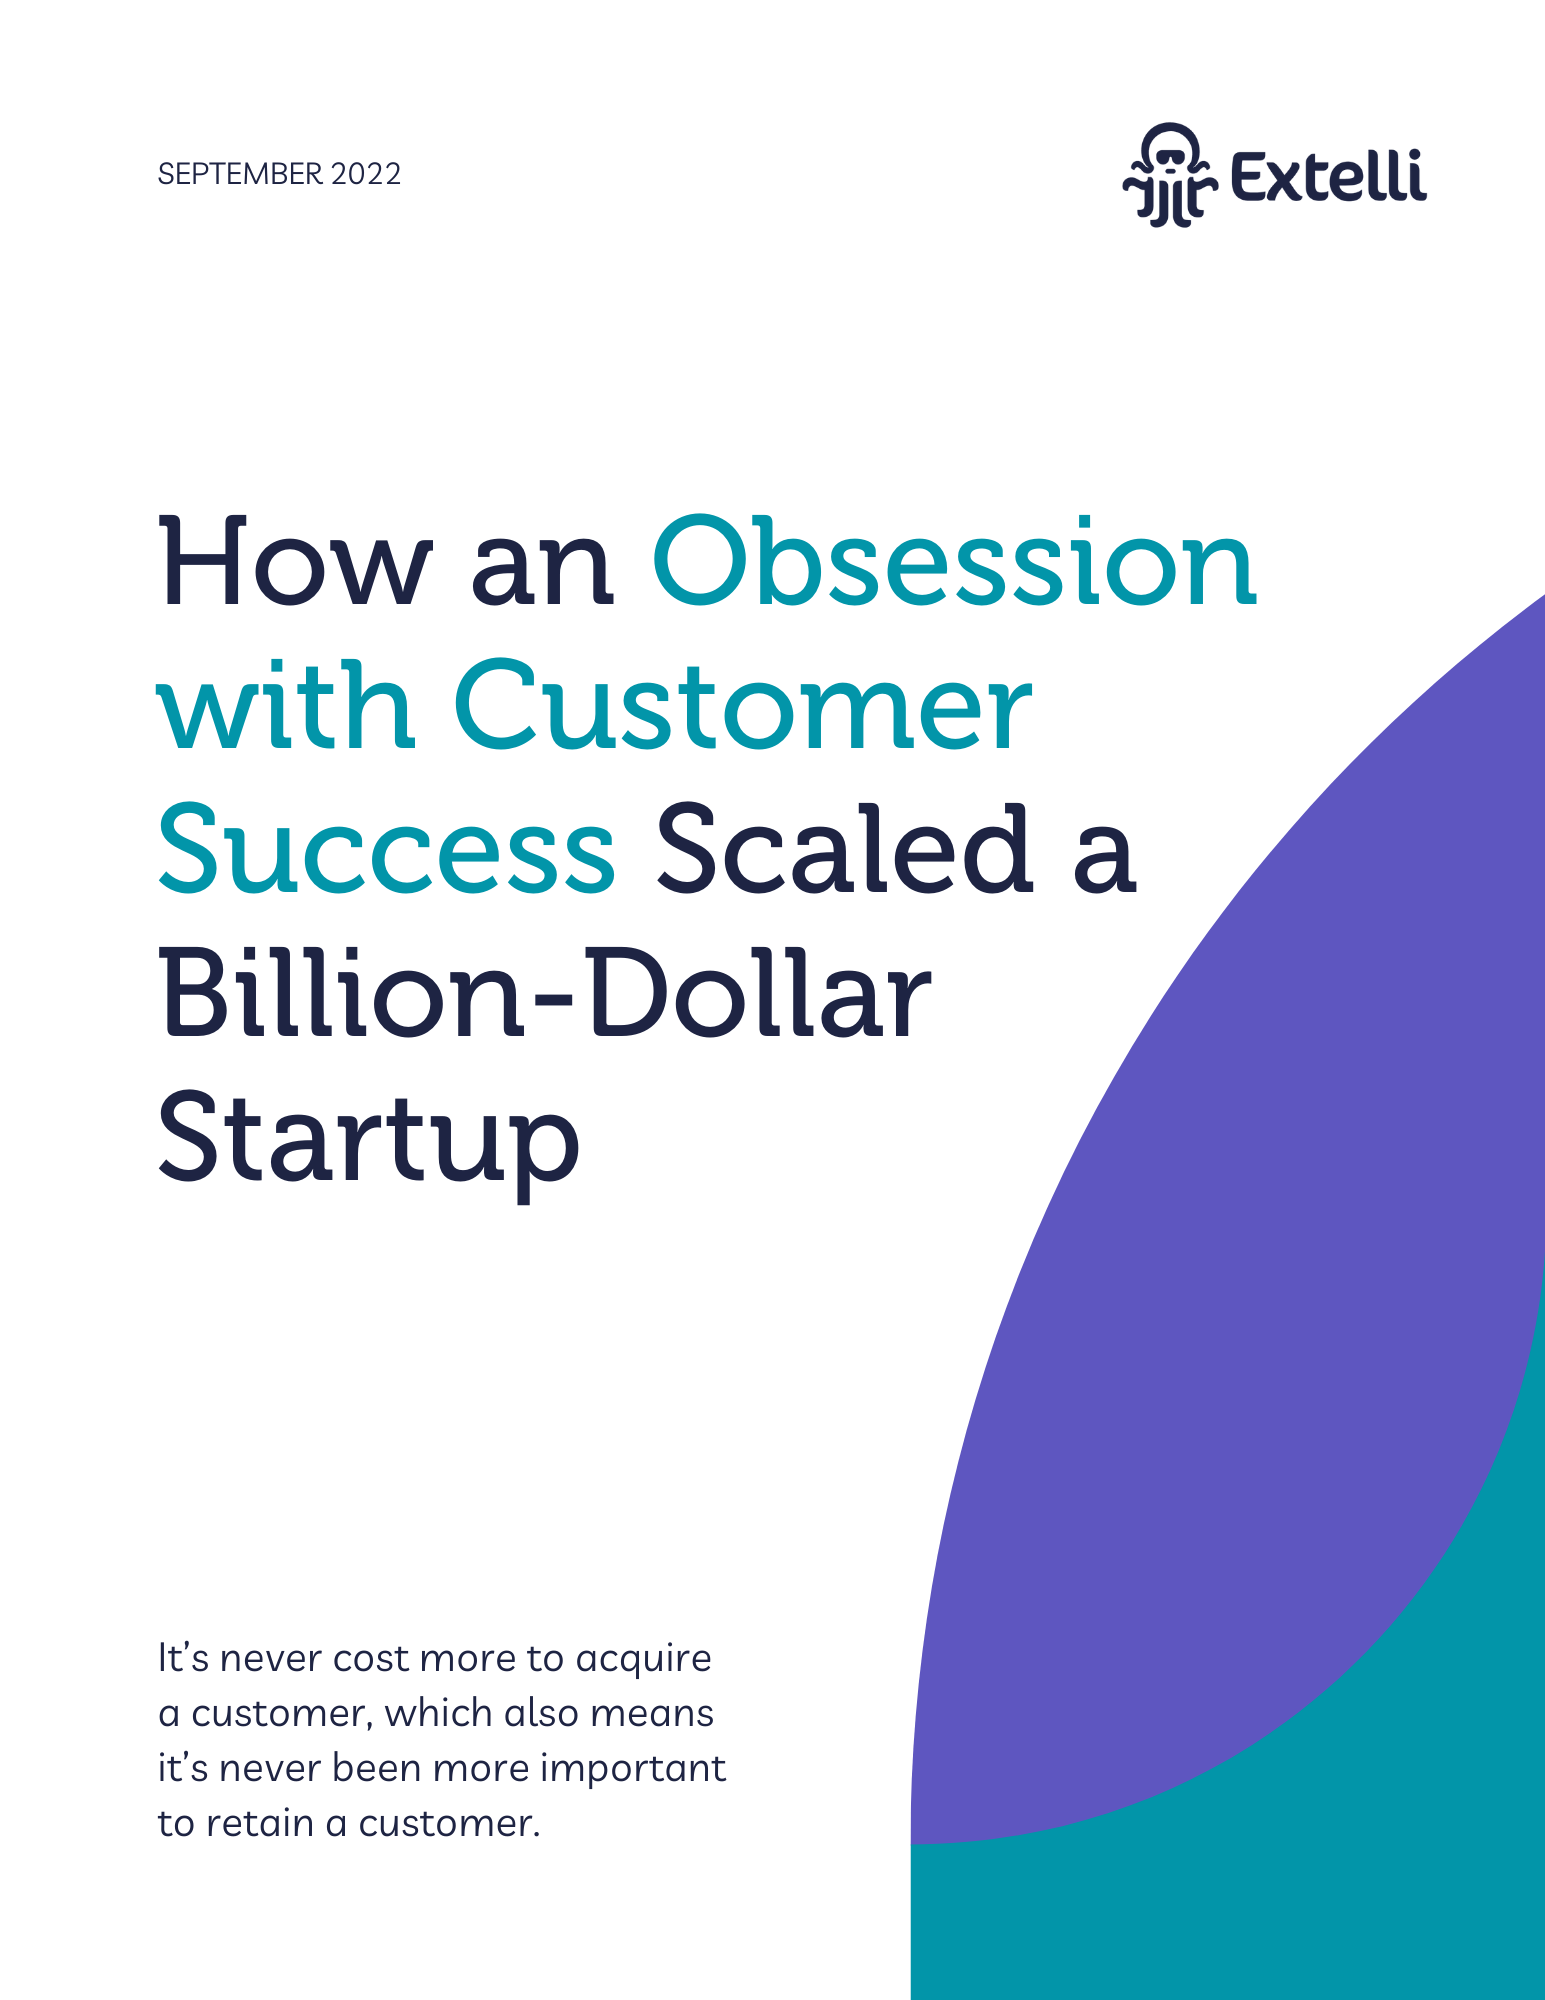 How an obsession with customer success scaled a billion-dollar startup